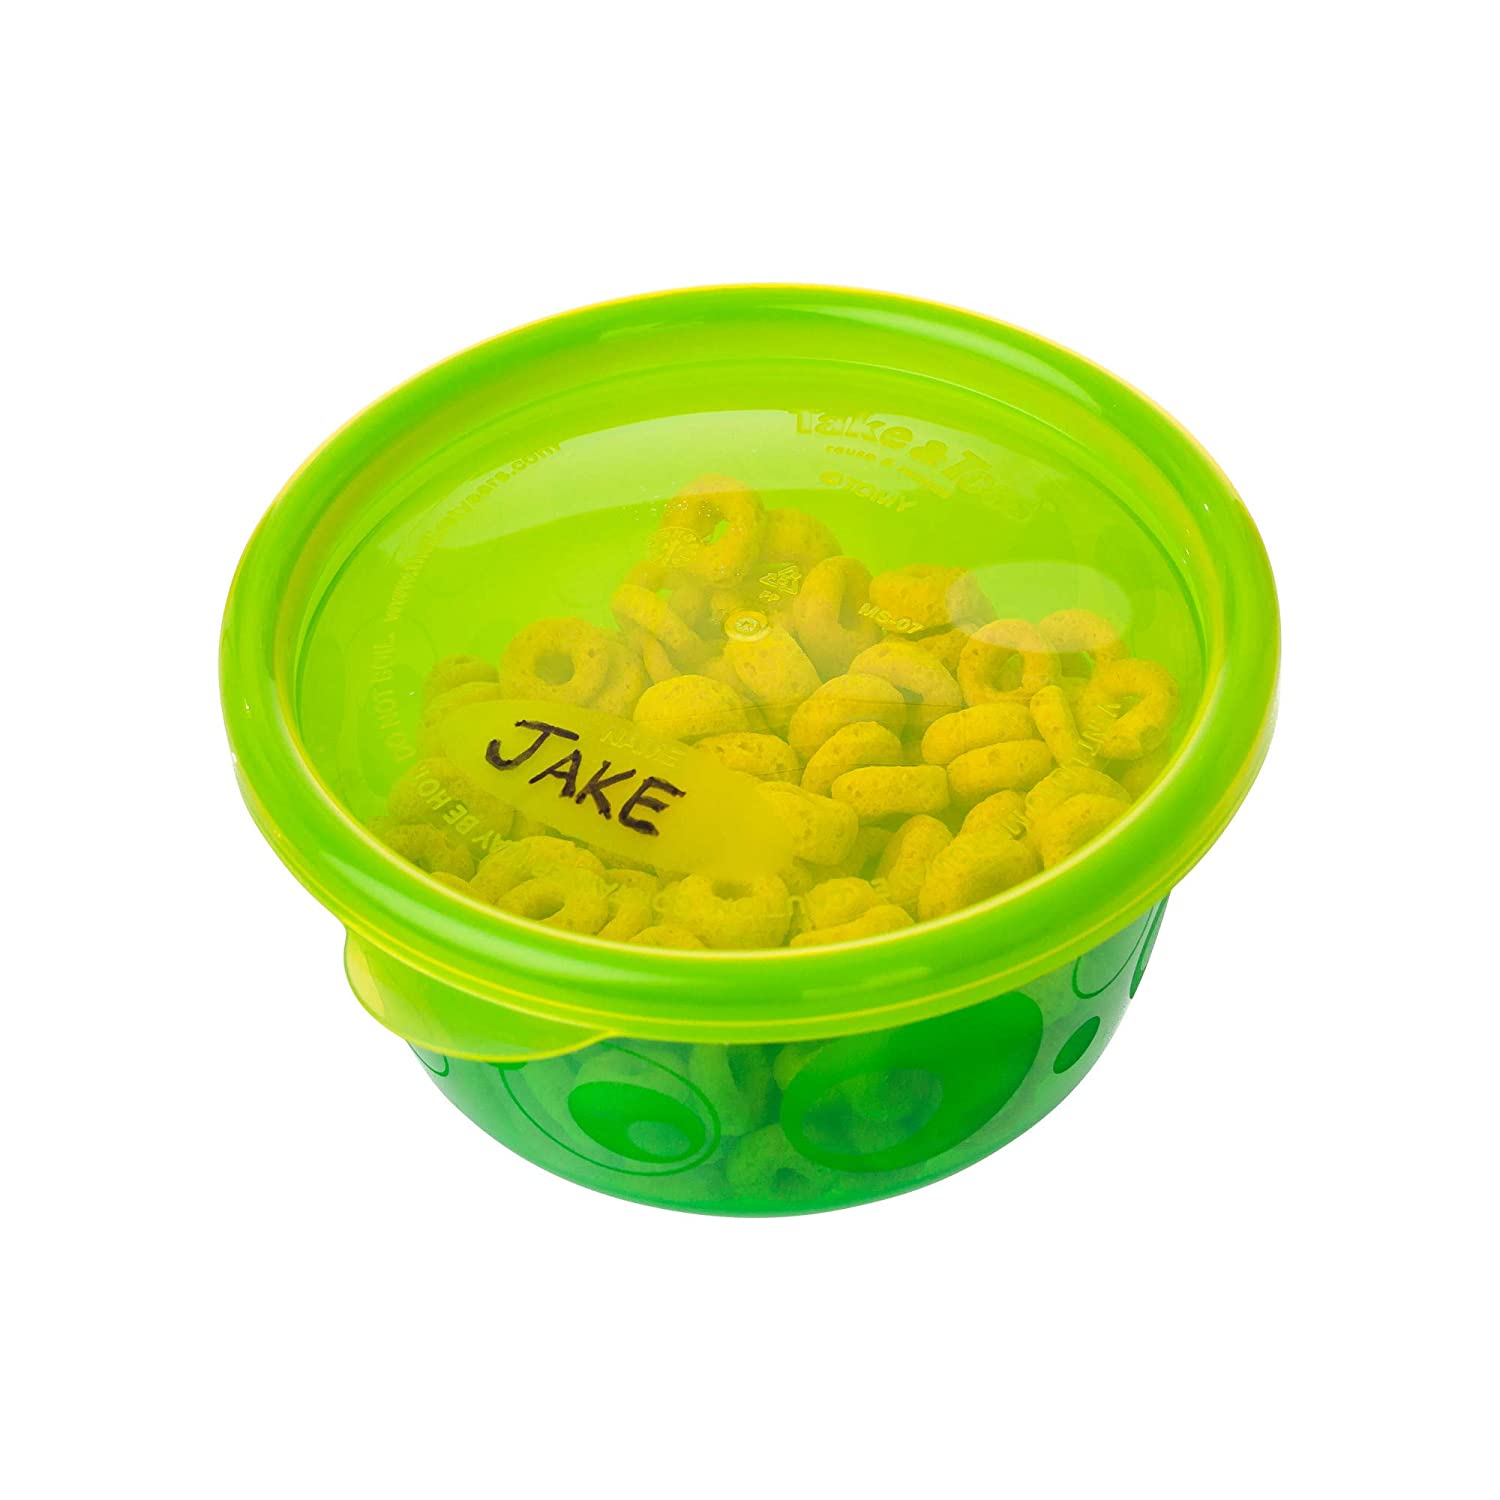 Take & Toss 8 Oz Bowls with Lids - 6 Pack 